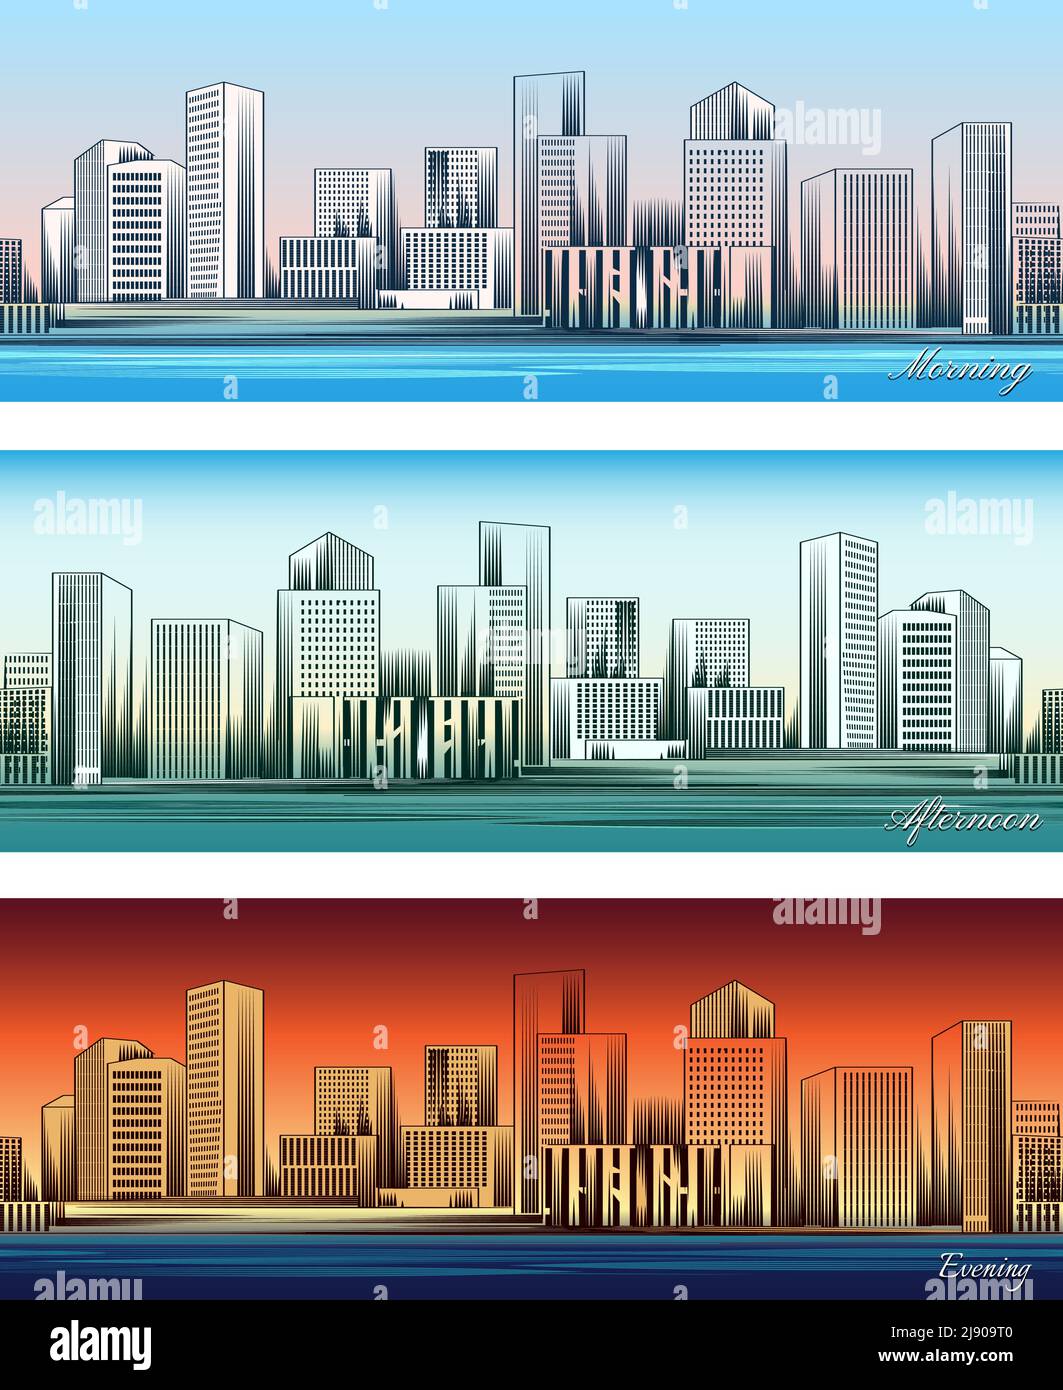 Set of city skylines in morning, afternoon and evening backgrounds seamless. Twilight and business district. Vector illustration Stock Vector